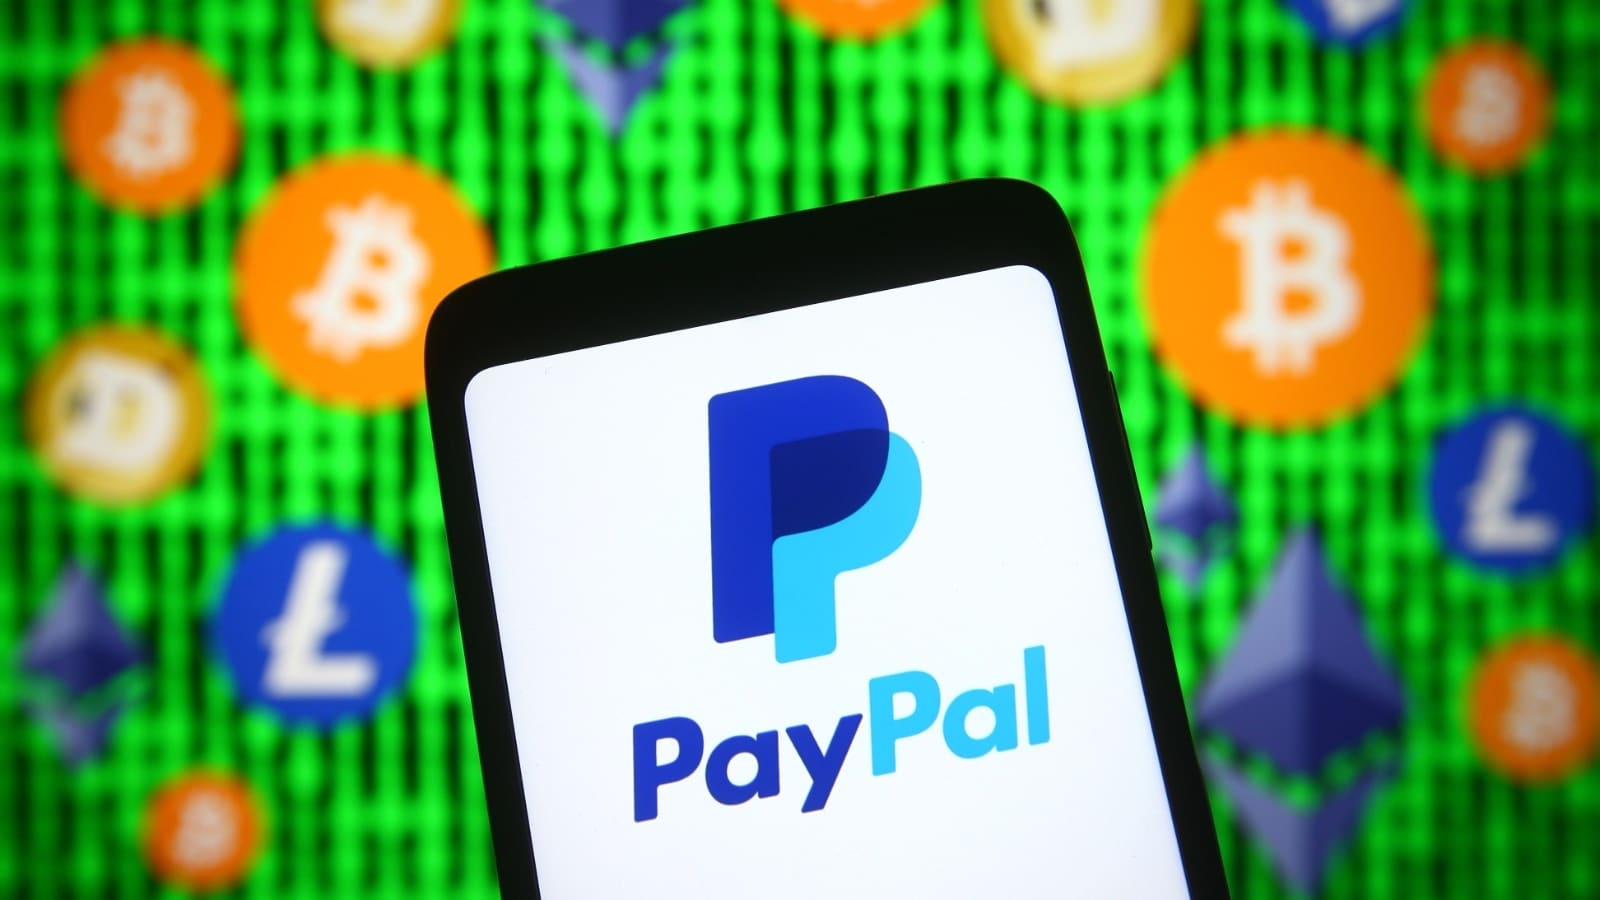 Paypal Launches Its Own Stablecoin